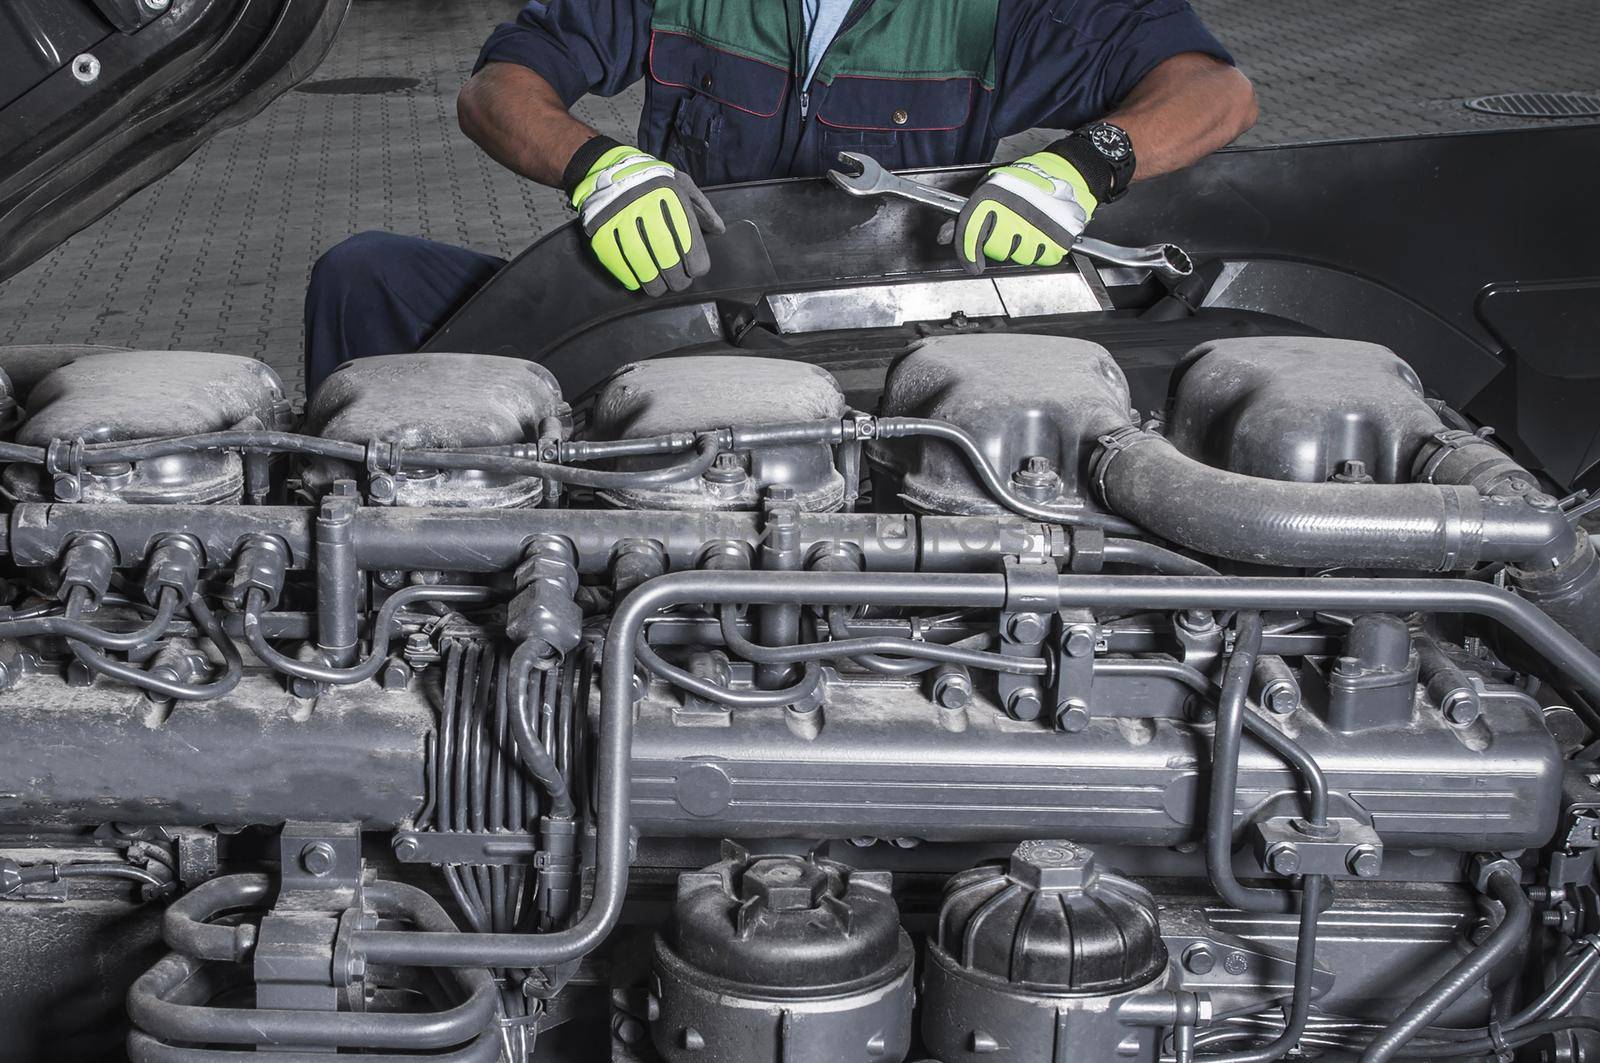 Heavy Duty Truck Diesel Engines Technician Maintain Scheduled Service by welcomia